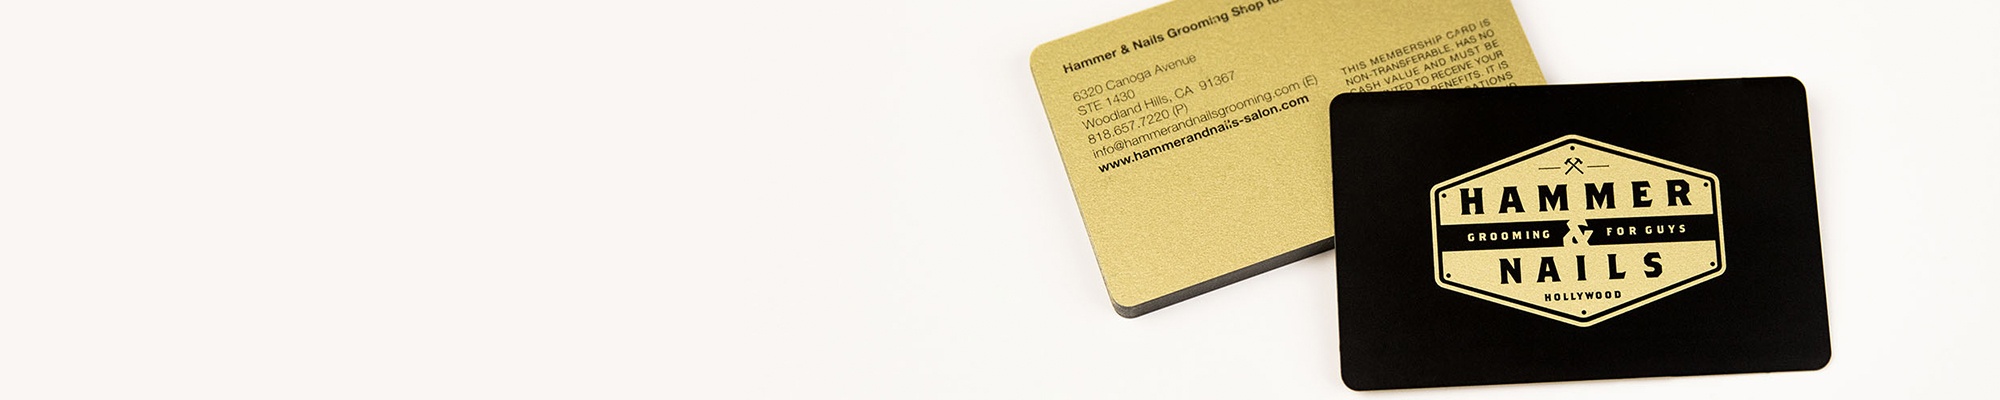 example of a gold metal business card